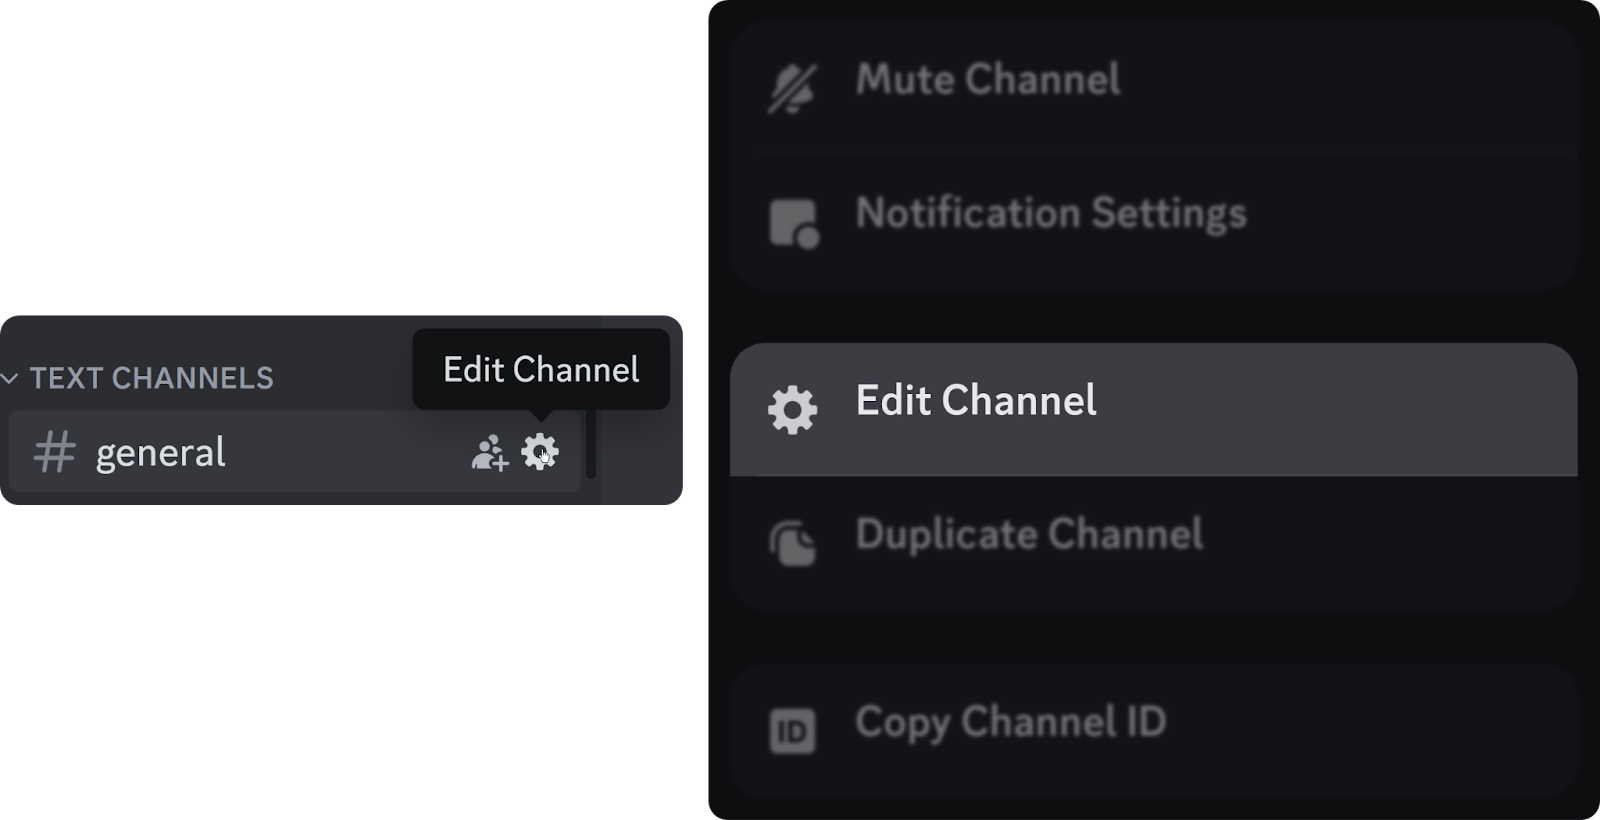 The Edit Channel buttons on Discord desktop (left) and mobile (right)